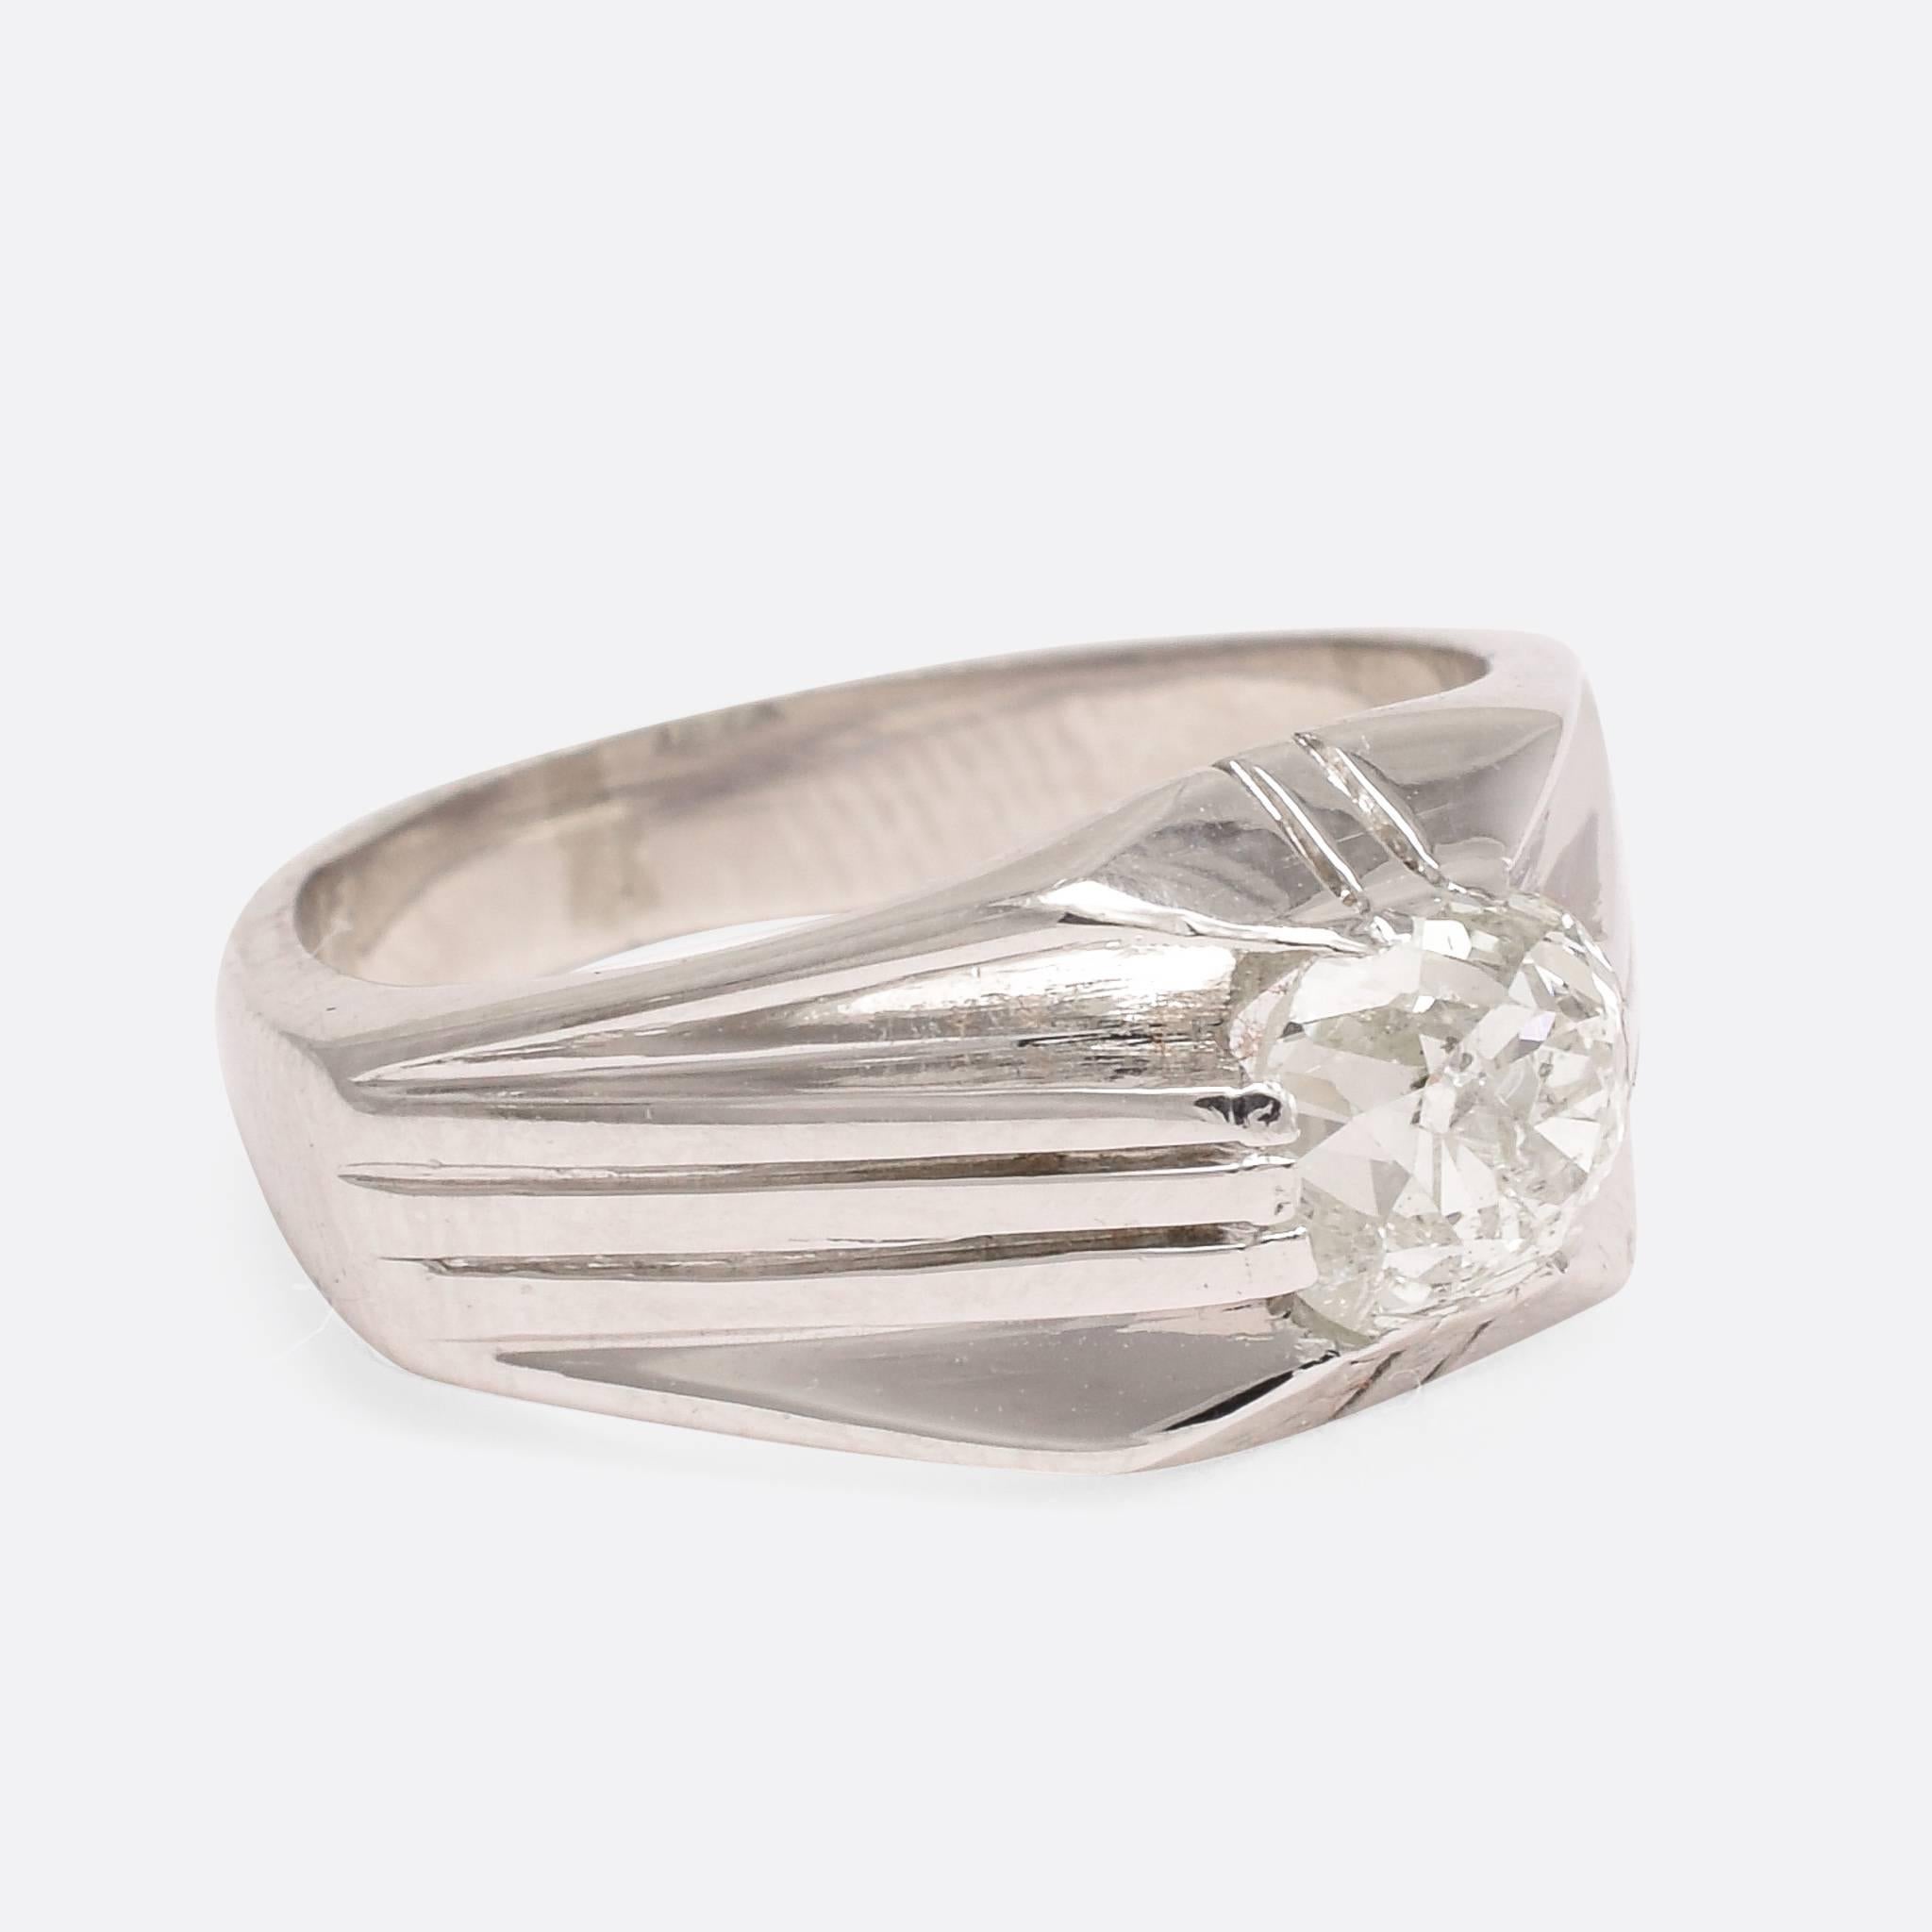 This exceptional 1930s Art Deco ring is modelled in platinum, and set with a chunky 1.2ct cushion cut diamond. The unusual flat shoulders are grooved, and draw the eye towards the main event: that wonderful antique diamond. The stone was likely cut